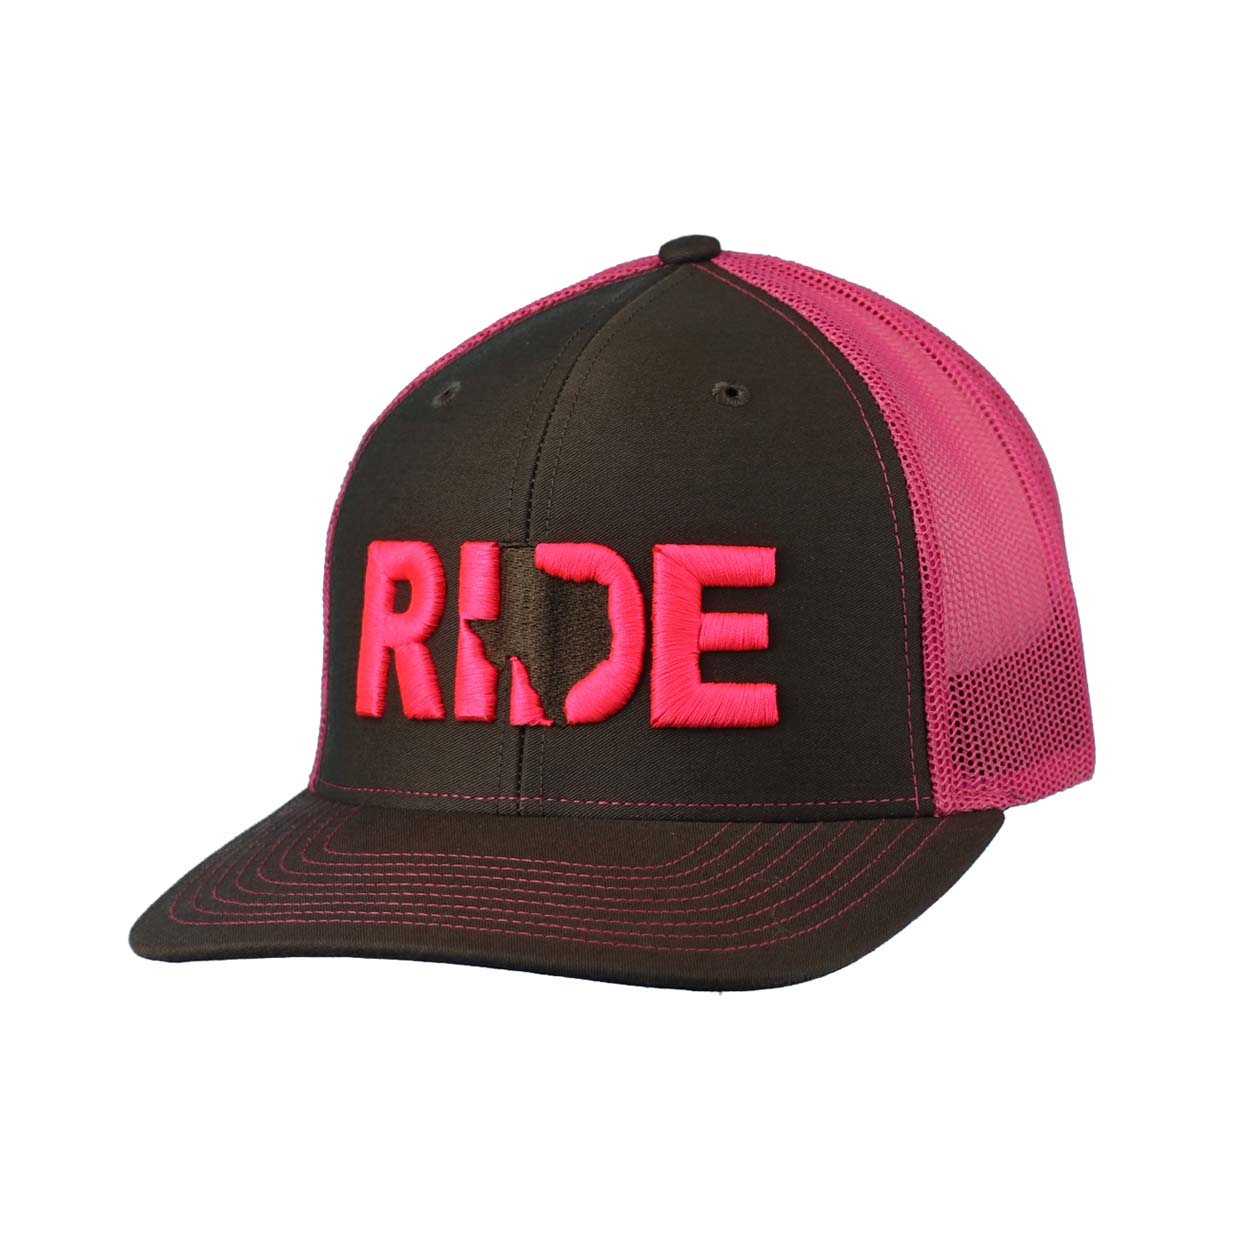 Ride Texas Classic Embroidered Snapback Trucker Hat Charcoal/Fuschia